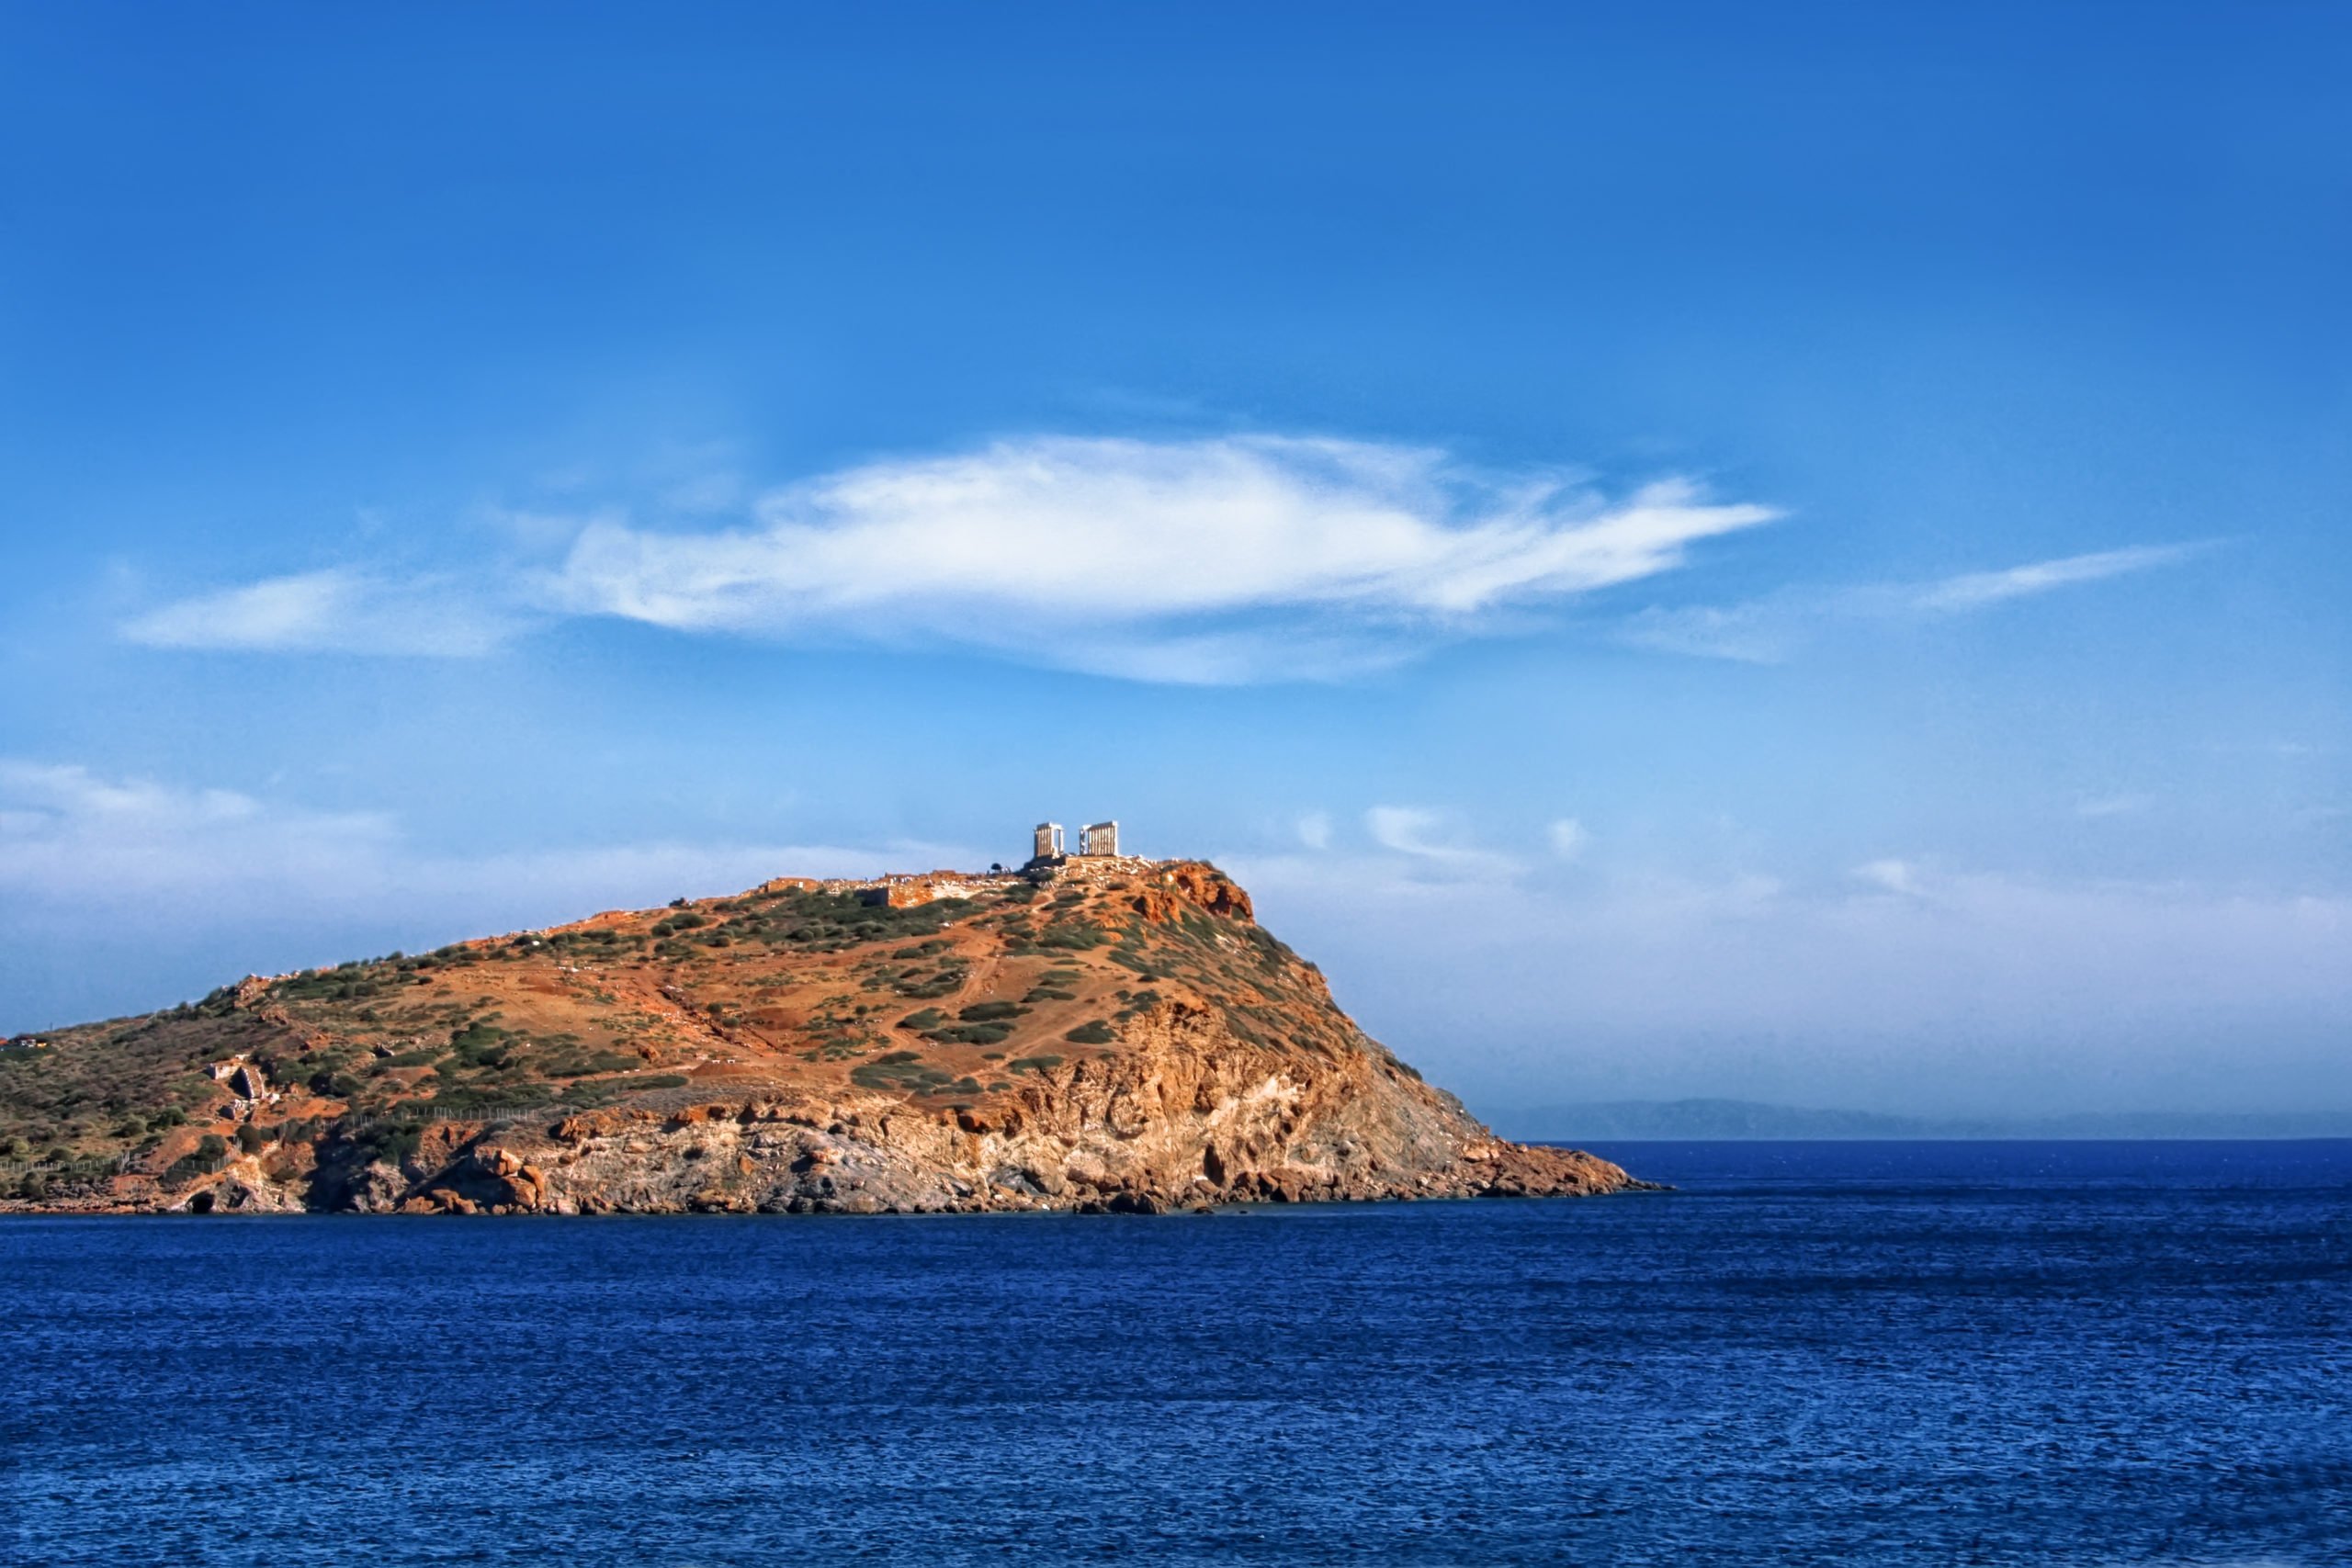 Discover The Stunning Temple Of Poseidon Rising On Cape Sounion During The Cape Sounio Half Day Tour From Athens